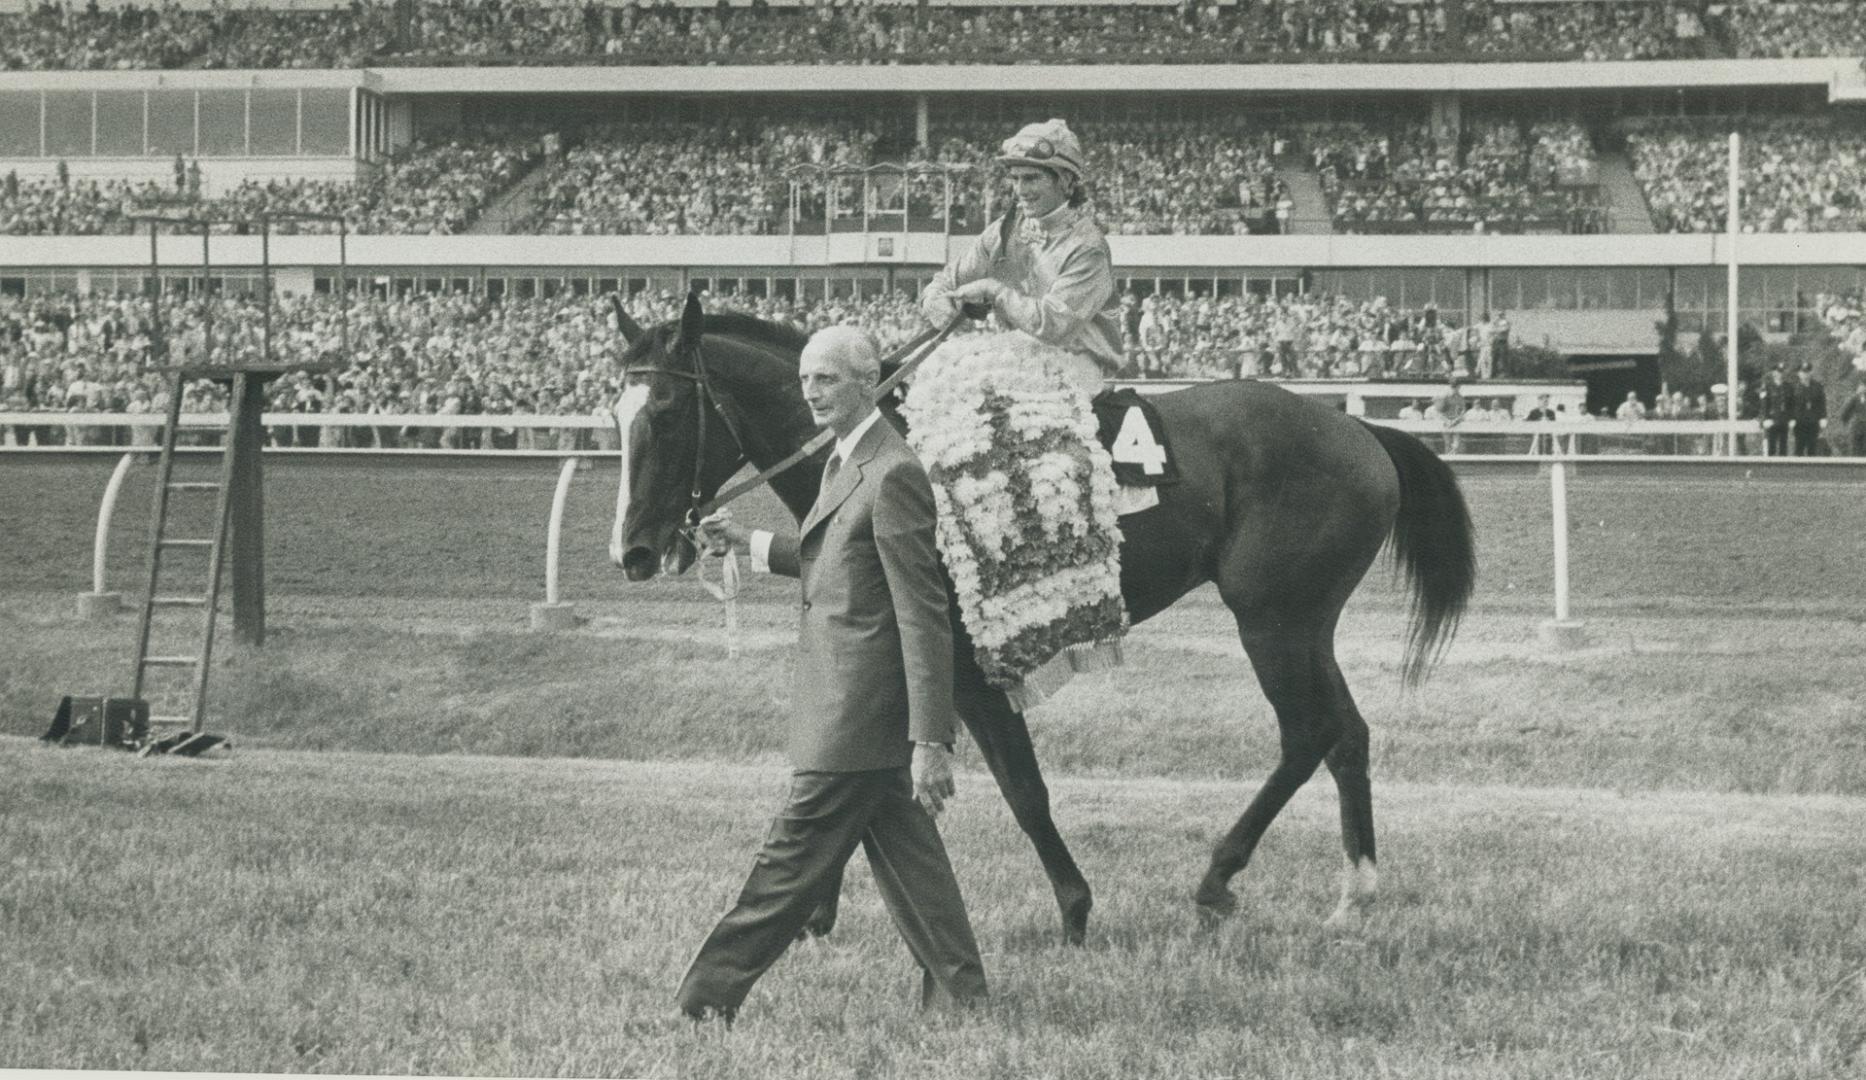 The big three. The combine that won the Queens Guineas parade past the stands as trainer J.C. Bentley leads Kennedy Road with jockey Sandy Hawley up